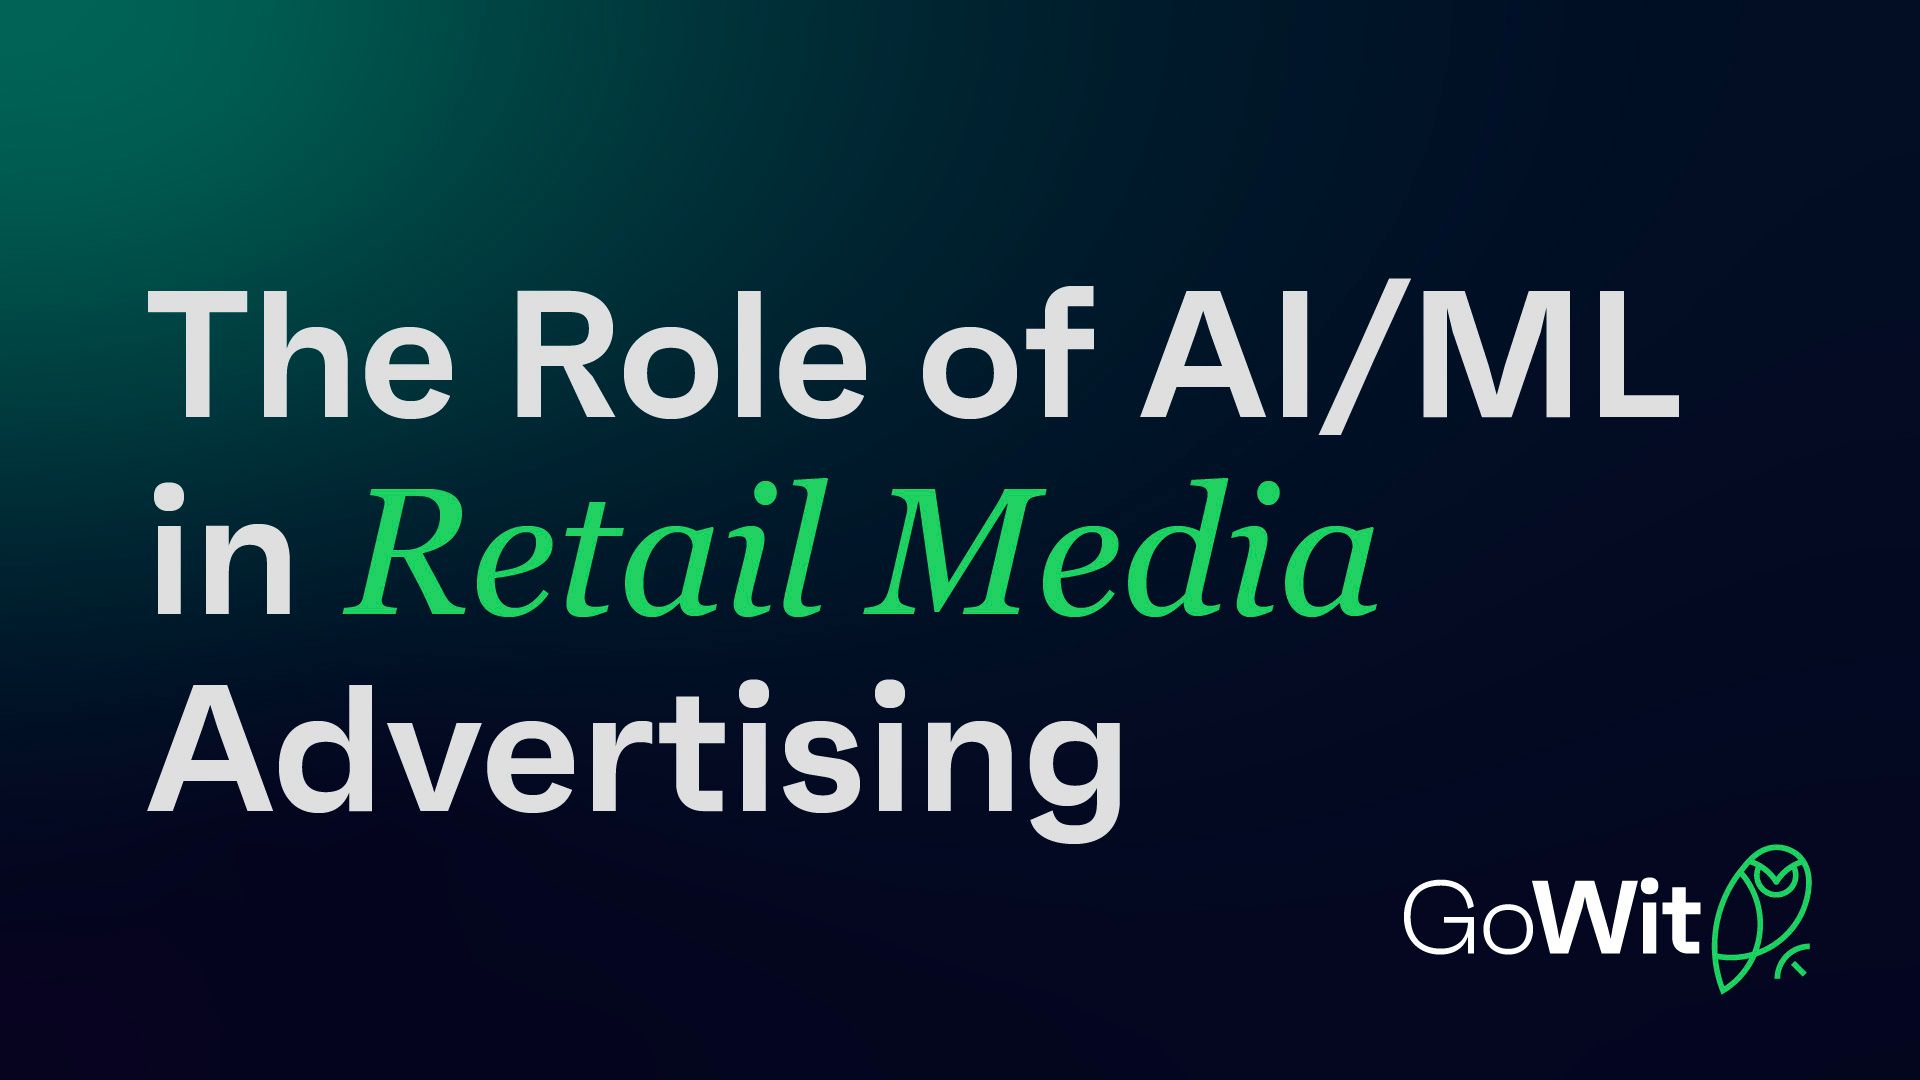 The Role of AI/ML in Retail Media Advertising